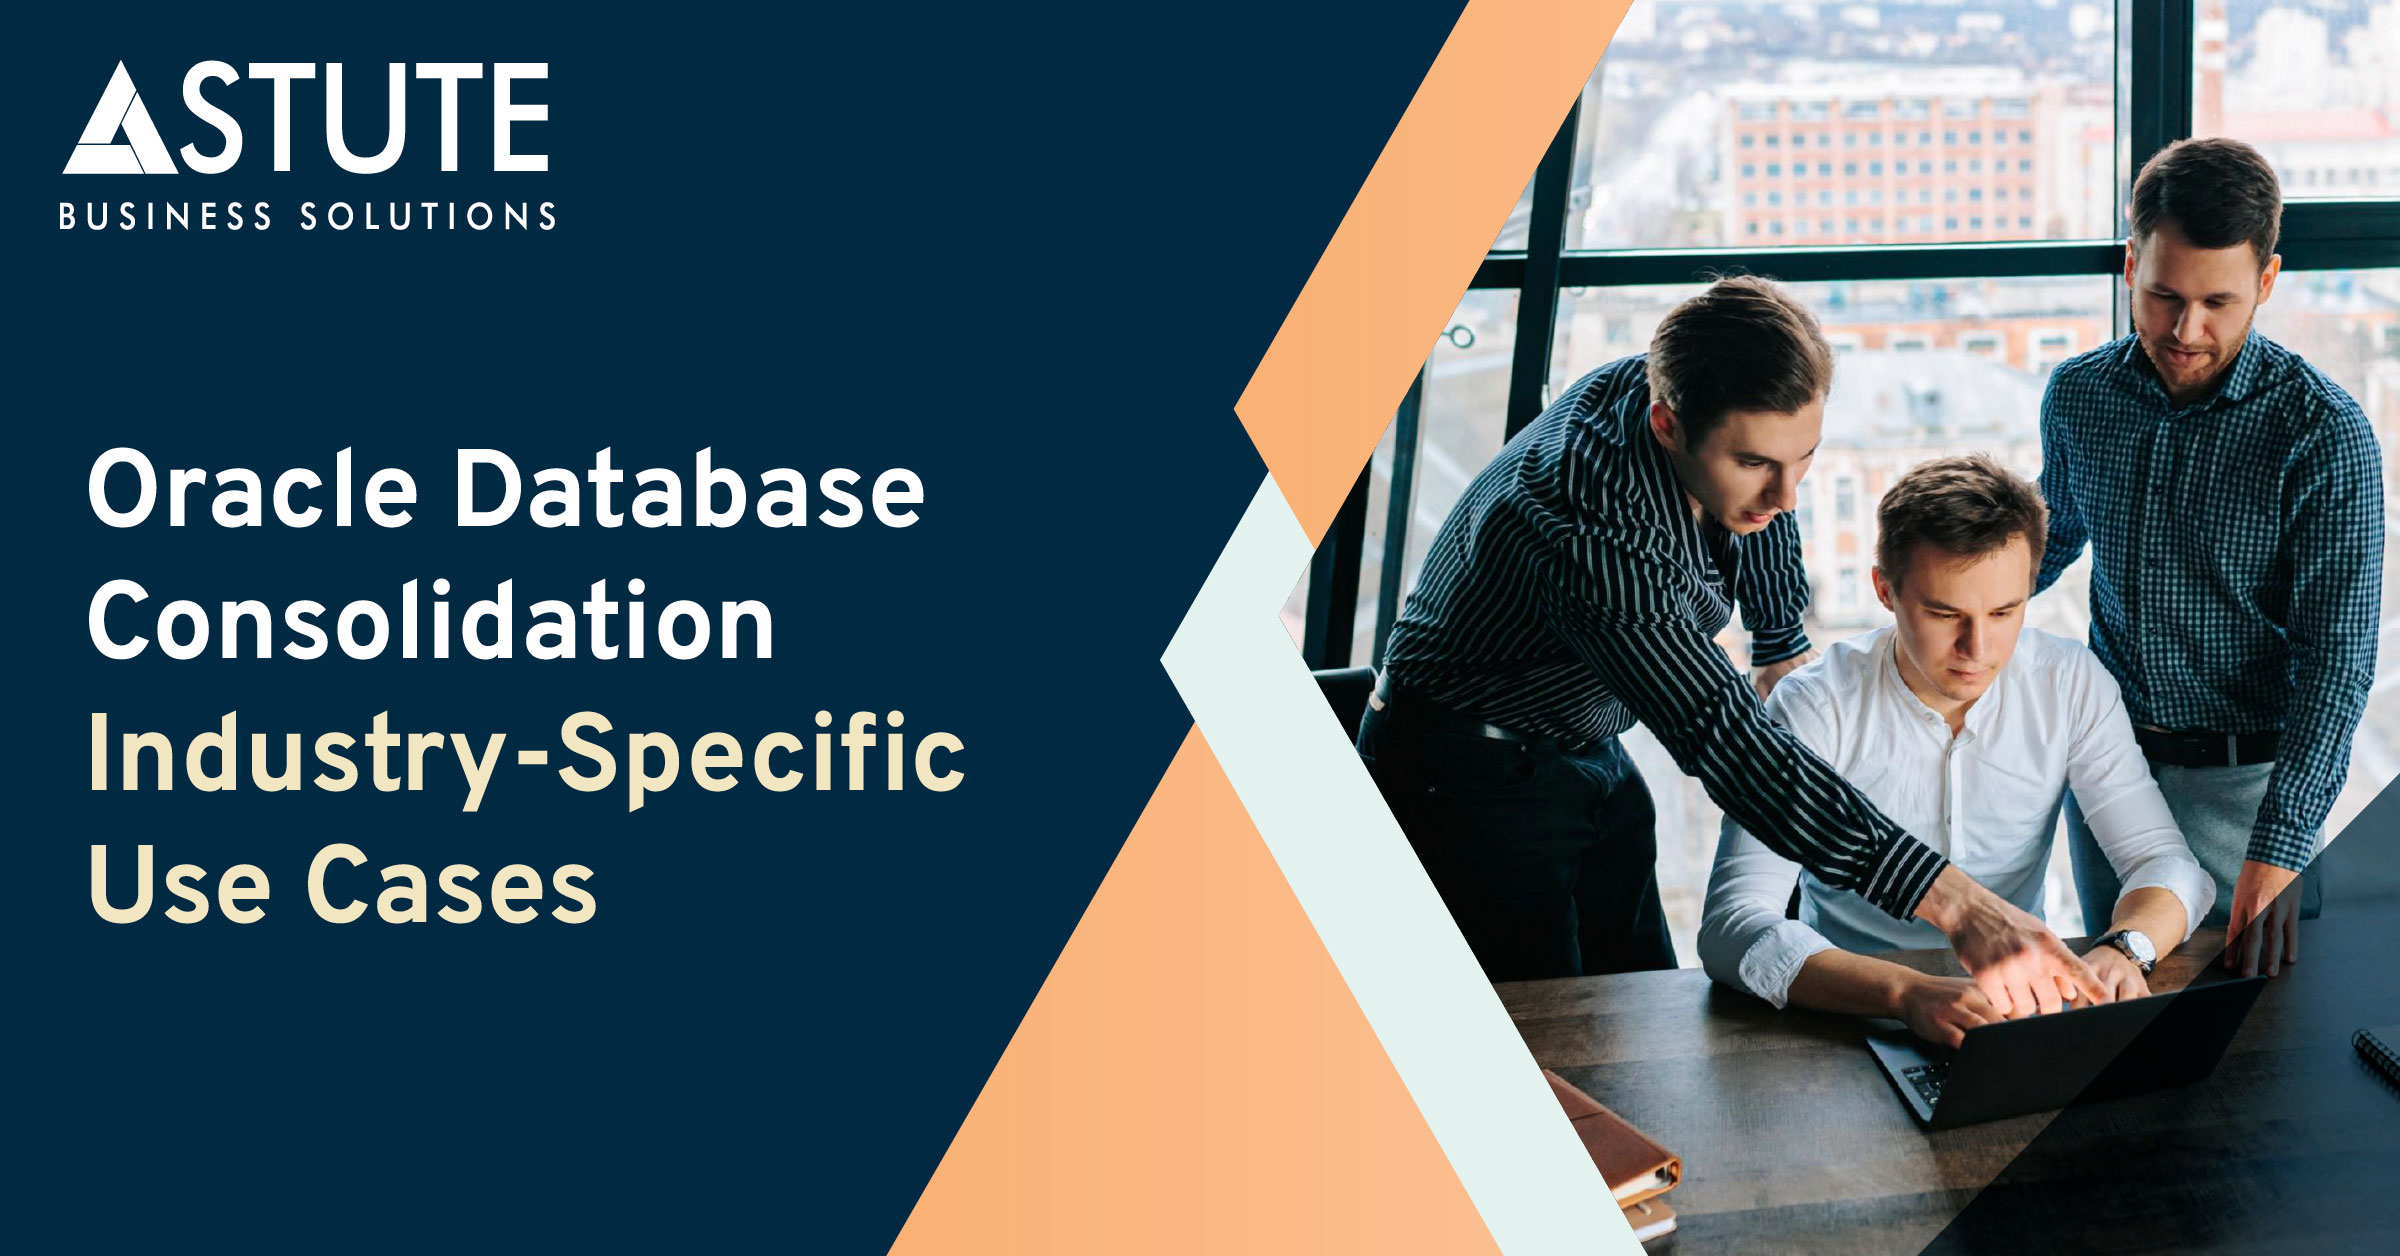 Oracle Database Consolidation: Industry-Specific Use Cases